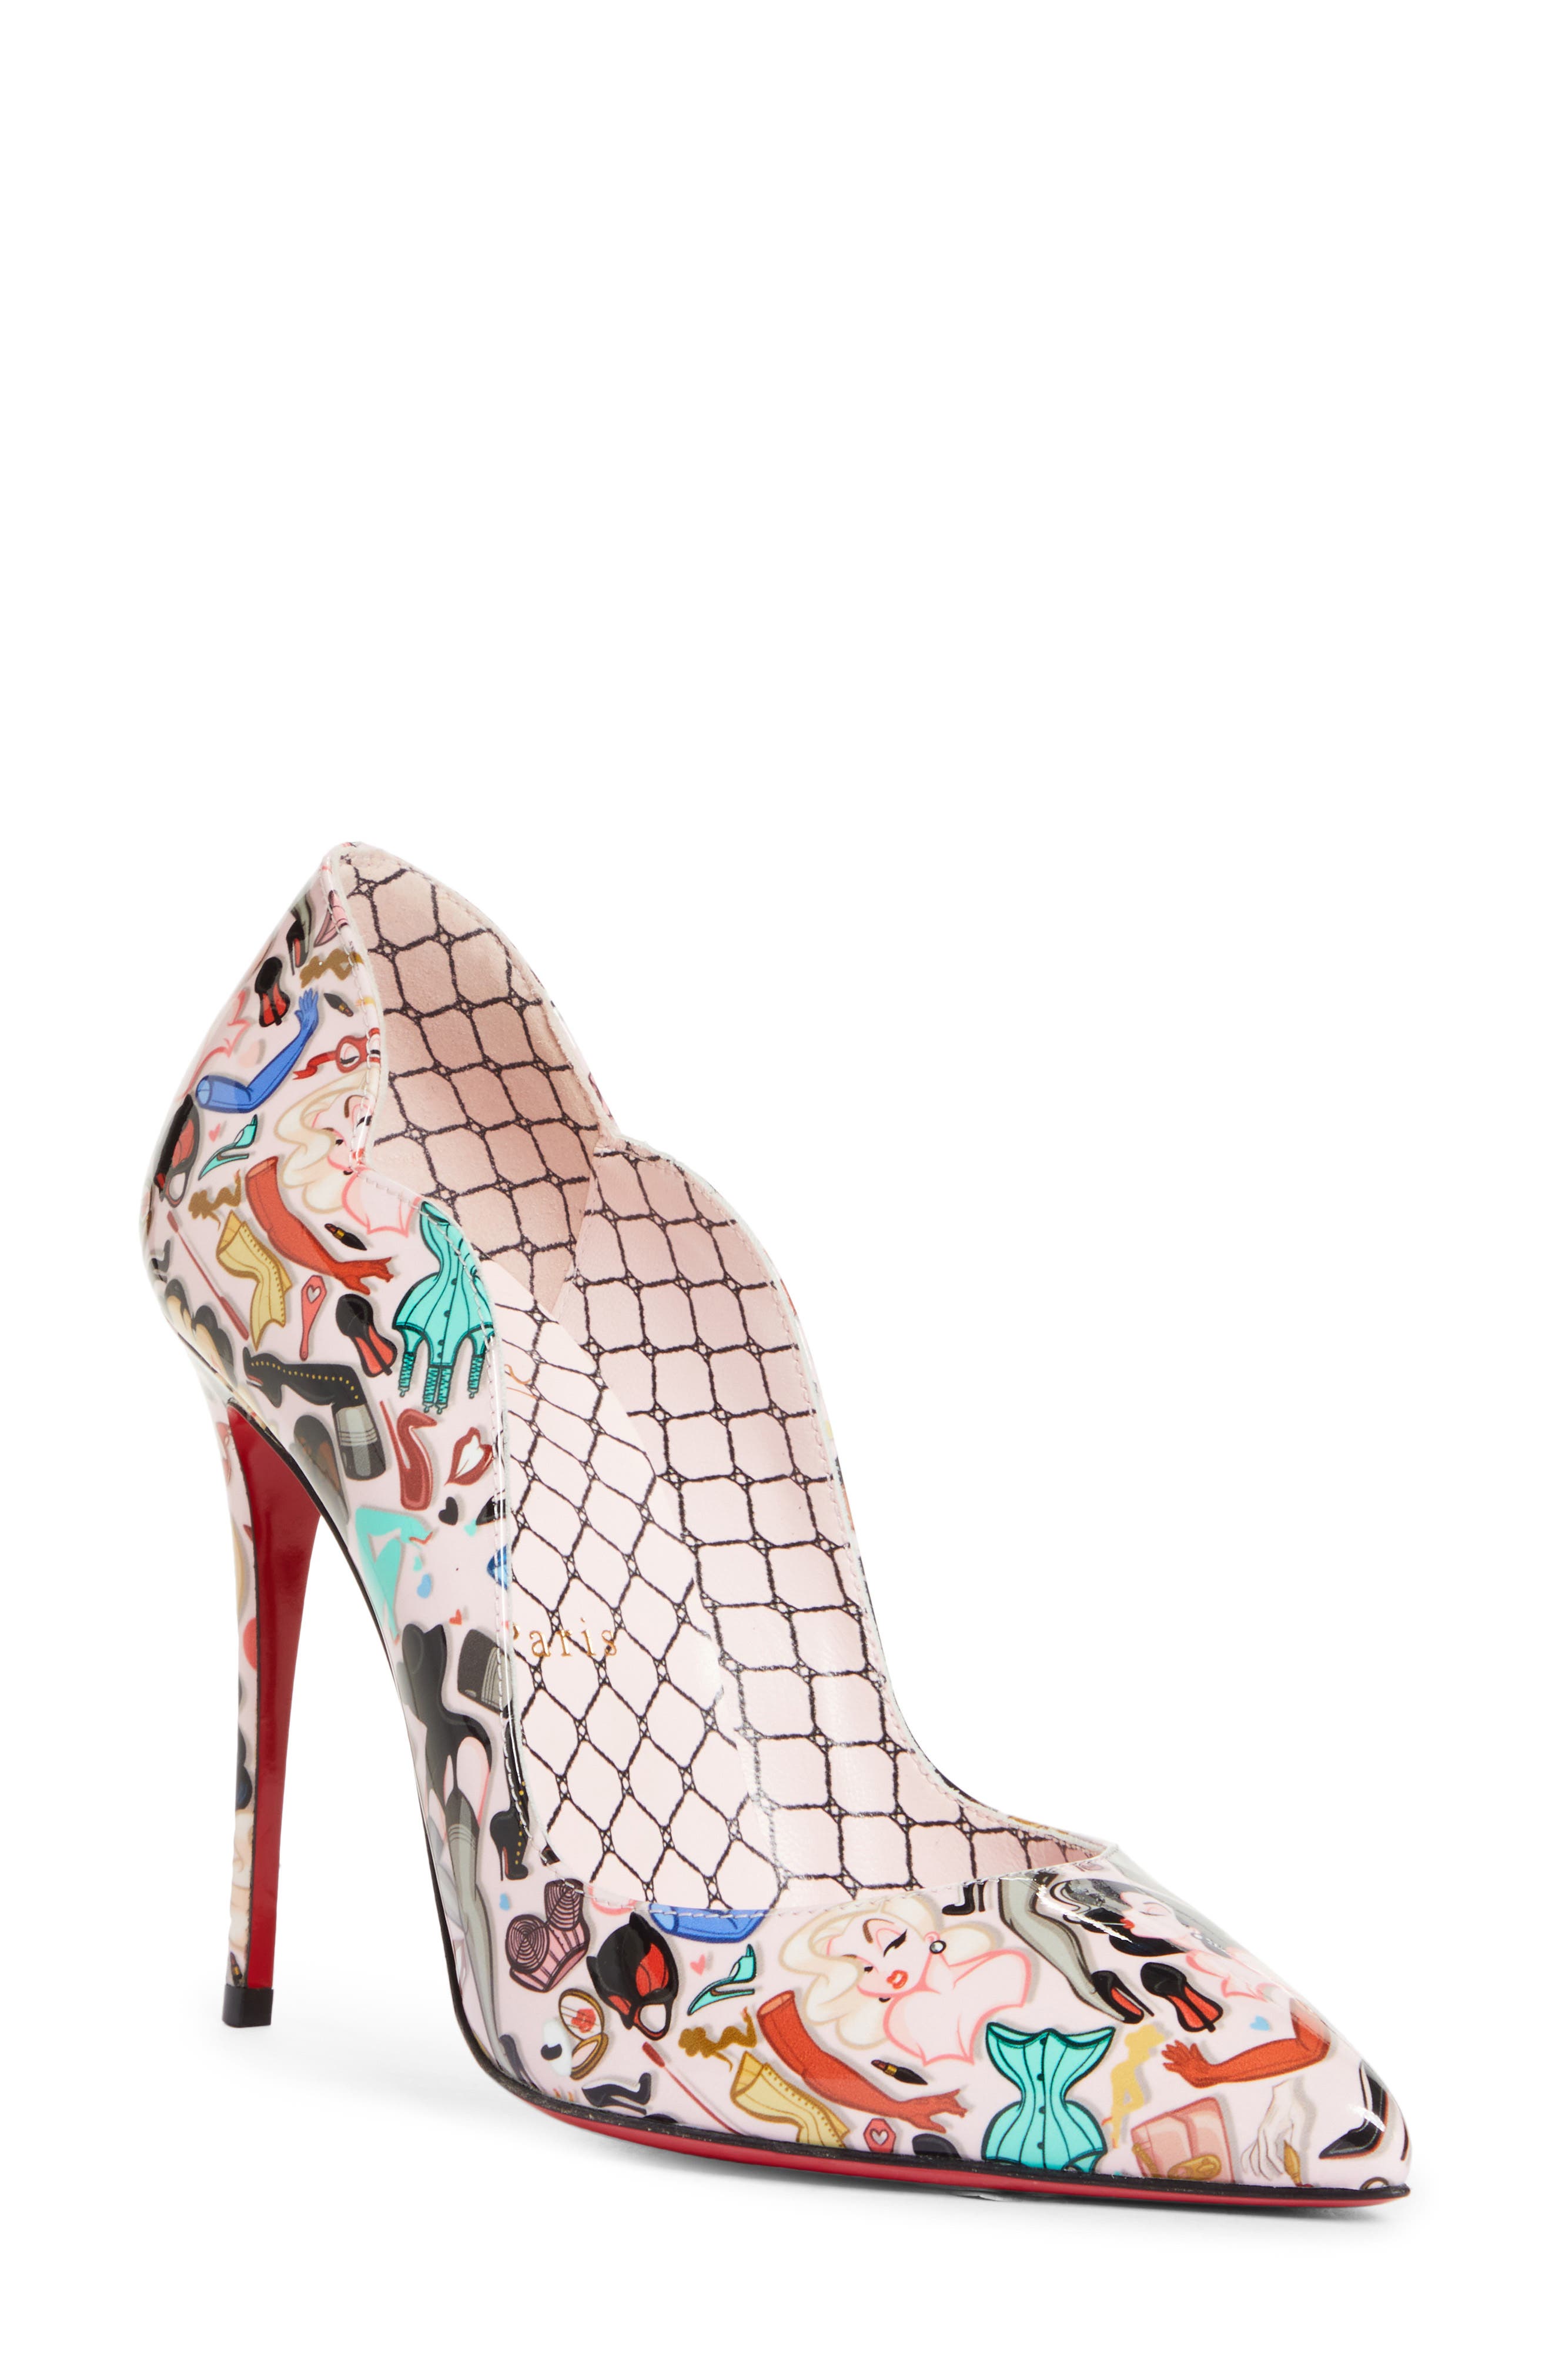 Christian Louboutin Hot Chick Pinup Print Pump in Multi at Nordstrom